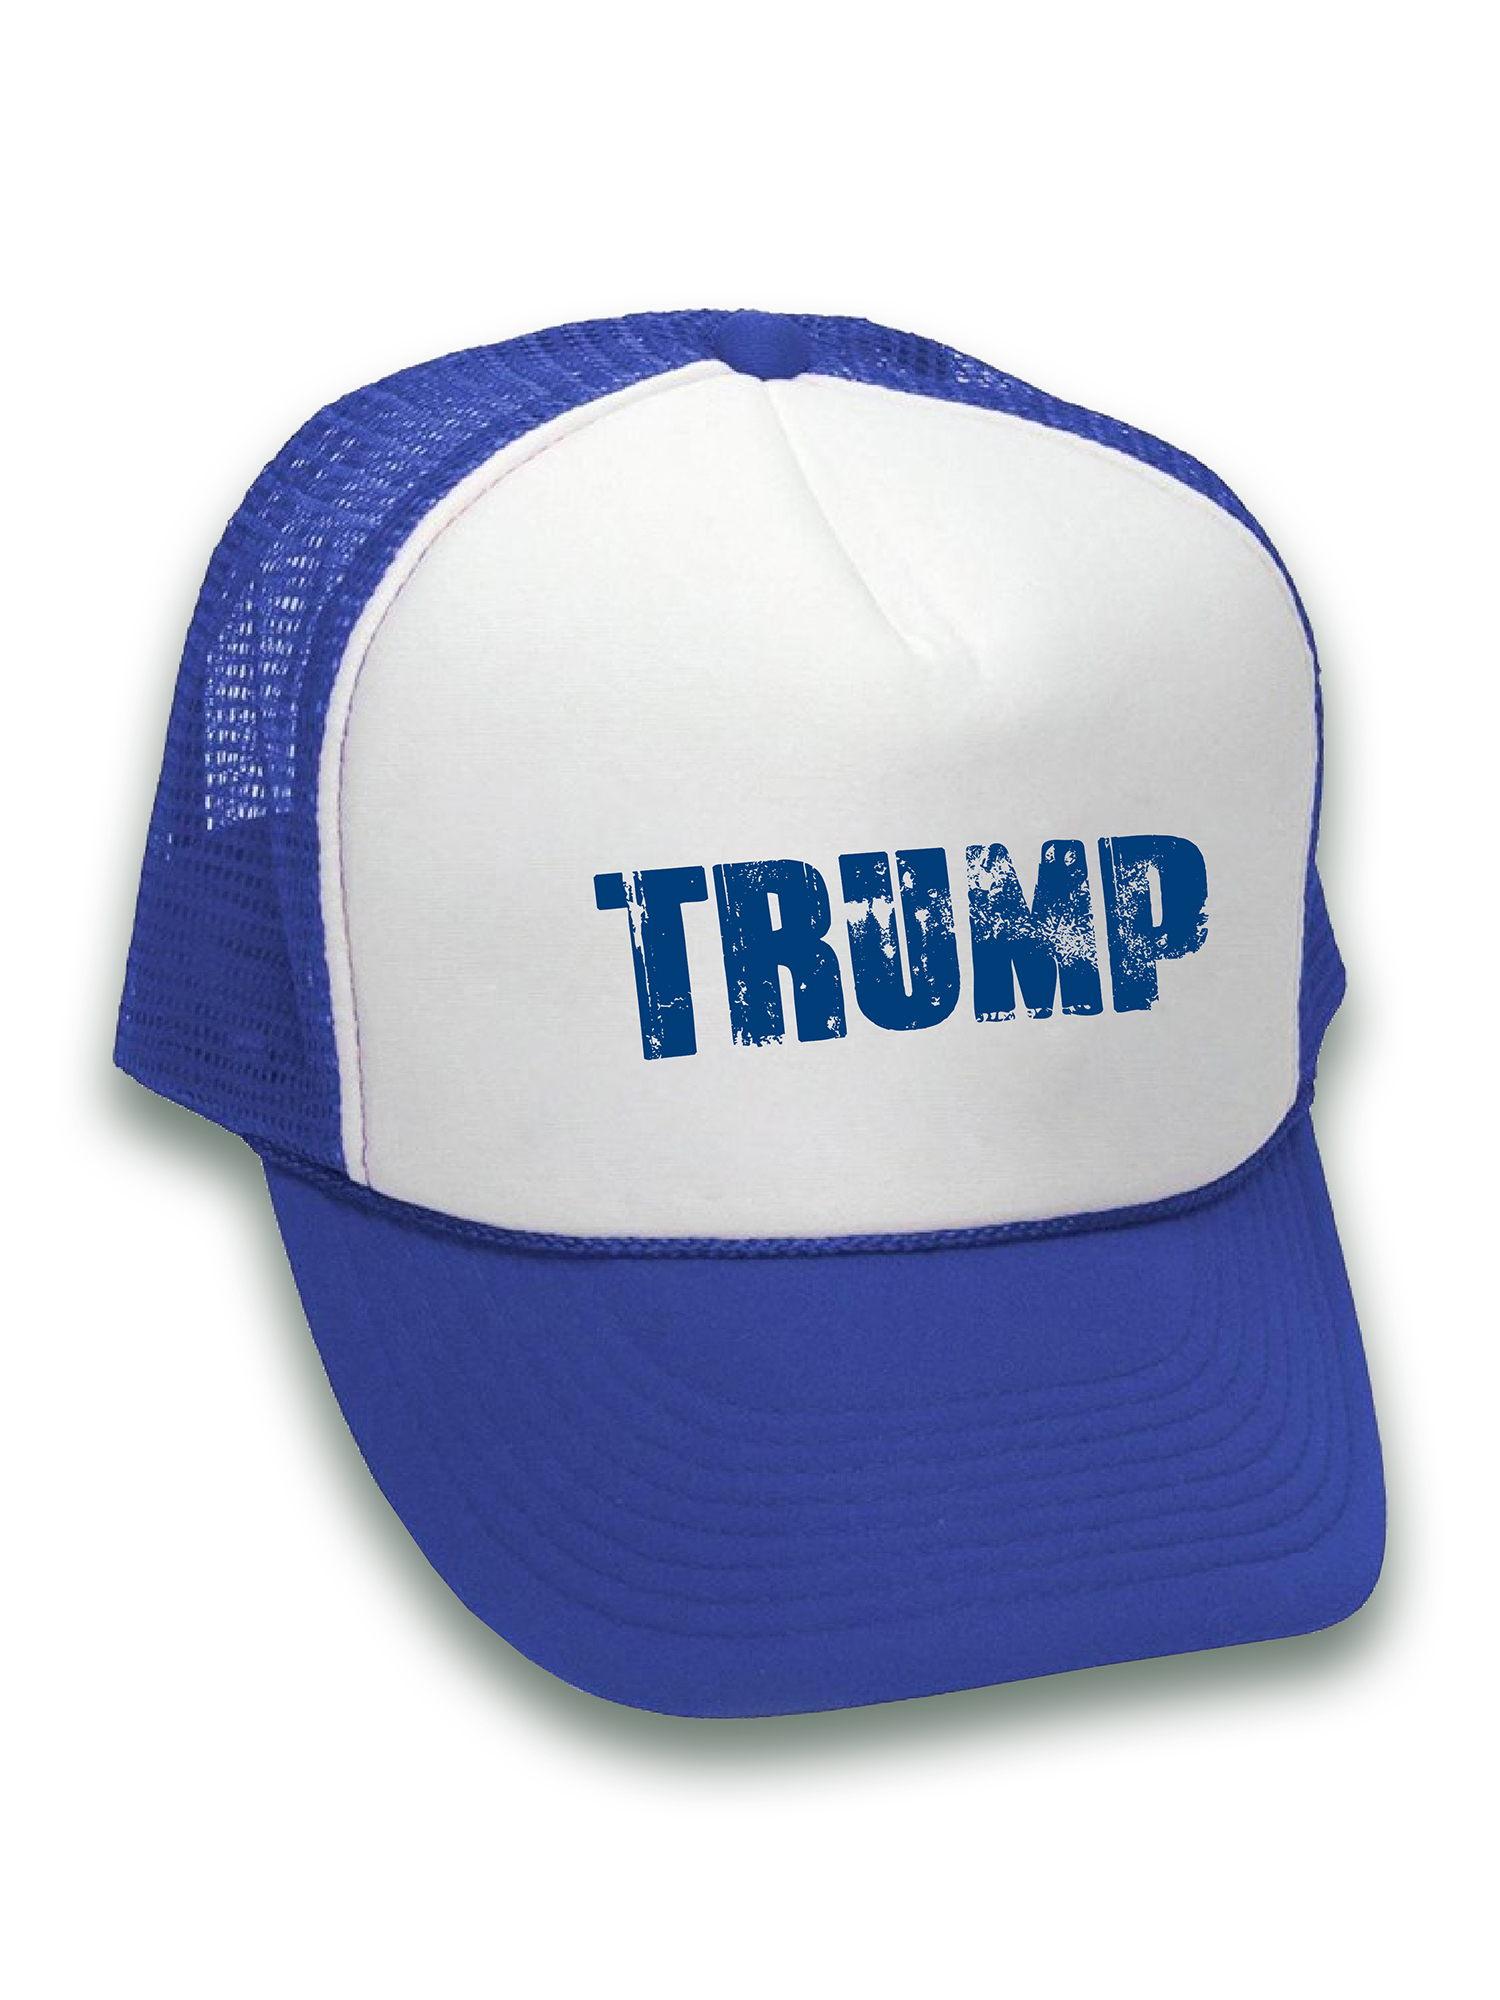 Awkward Styles Another Trump Hat Funny Trump Trucker Hats President Trump Gifts Republican Campaign Hats Keep America Great Trump 2020 Snapback Hats Political Baseball Caps USA Trump Hat Unisex - image 2 of 6